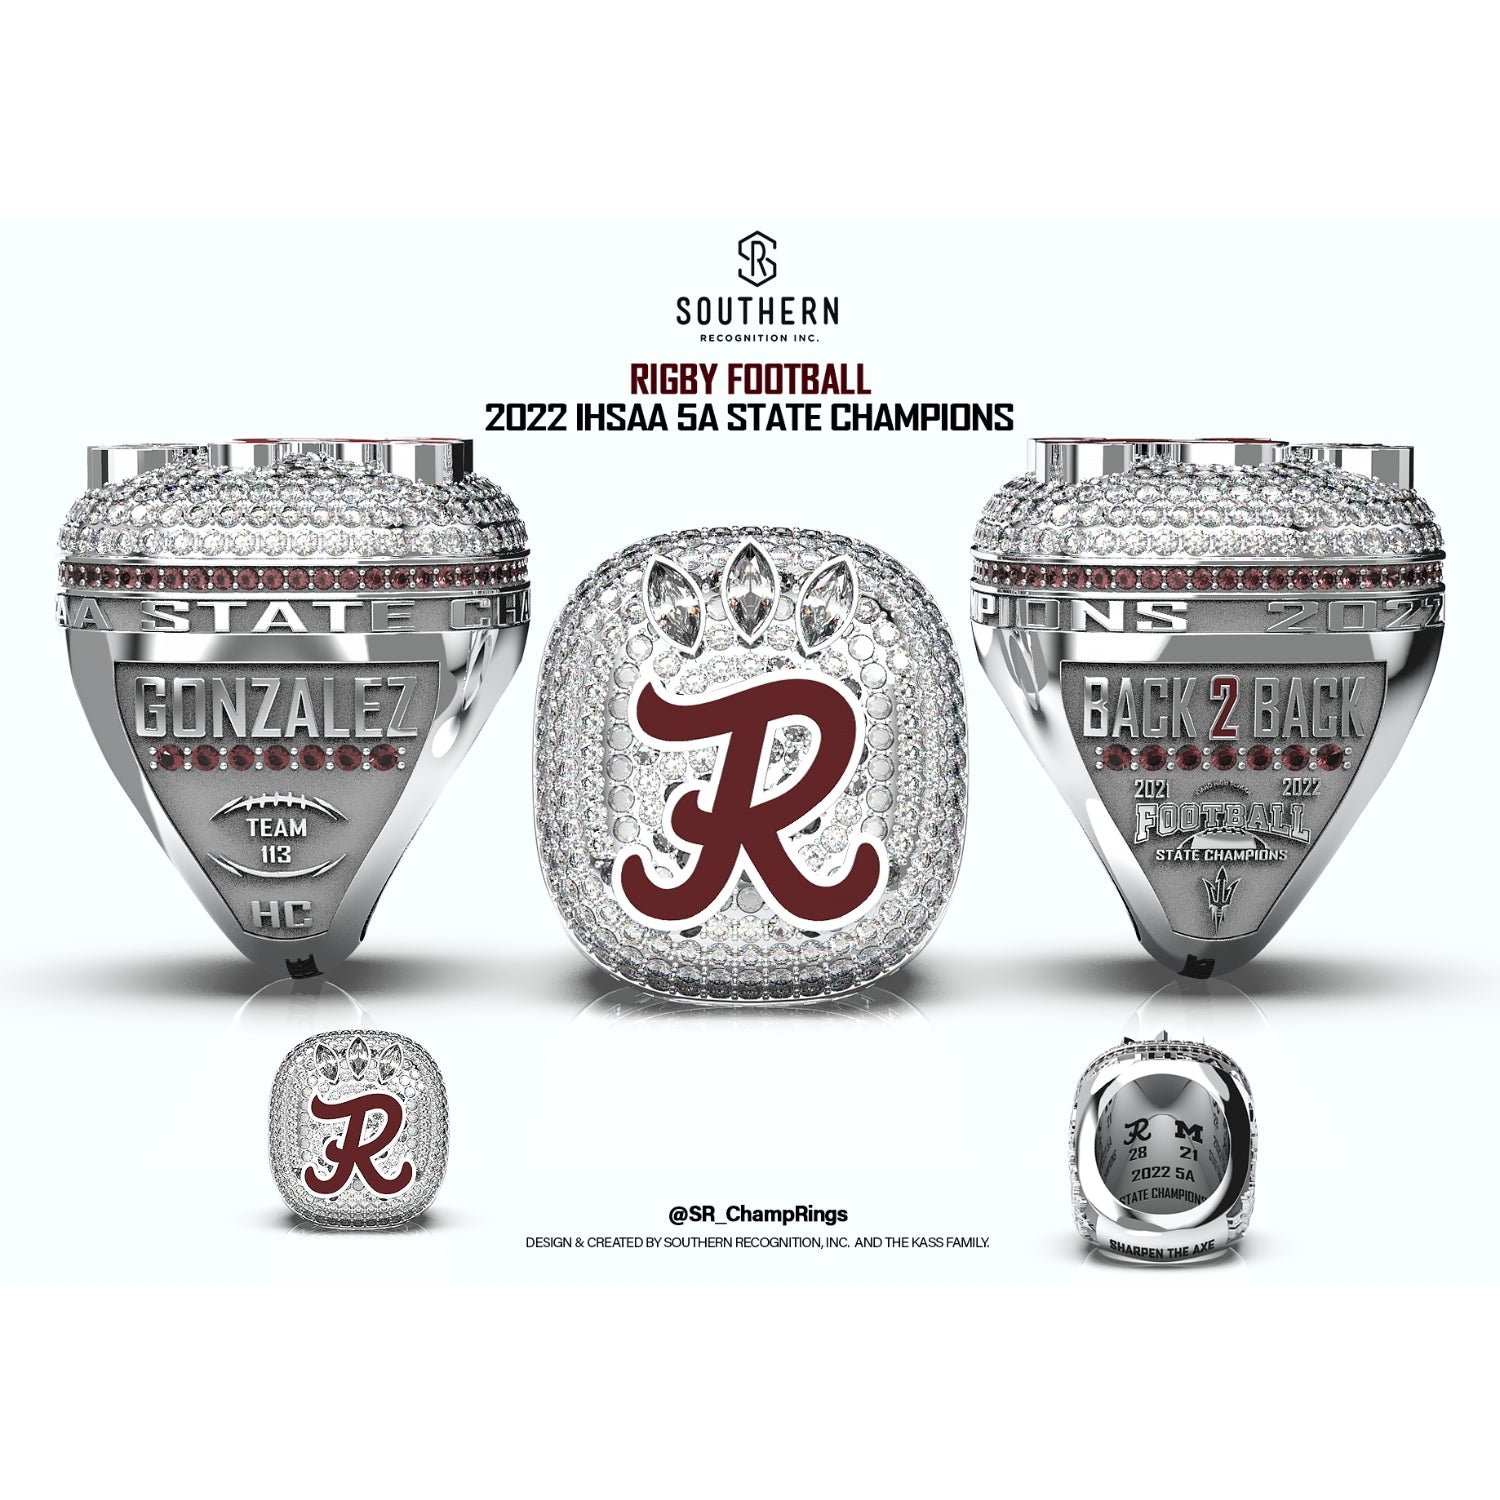 STUDENT ATHLETE or COACHING STAFF ONLY - Partial Payment - Rigby - 2022 Football State Championship Ring